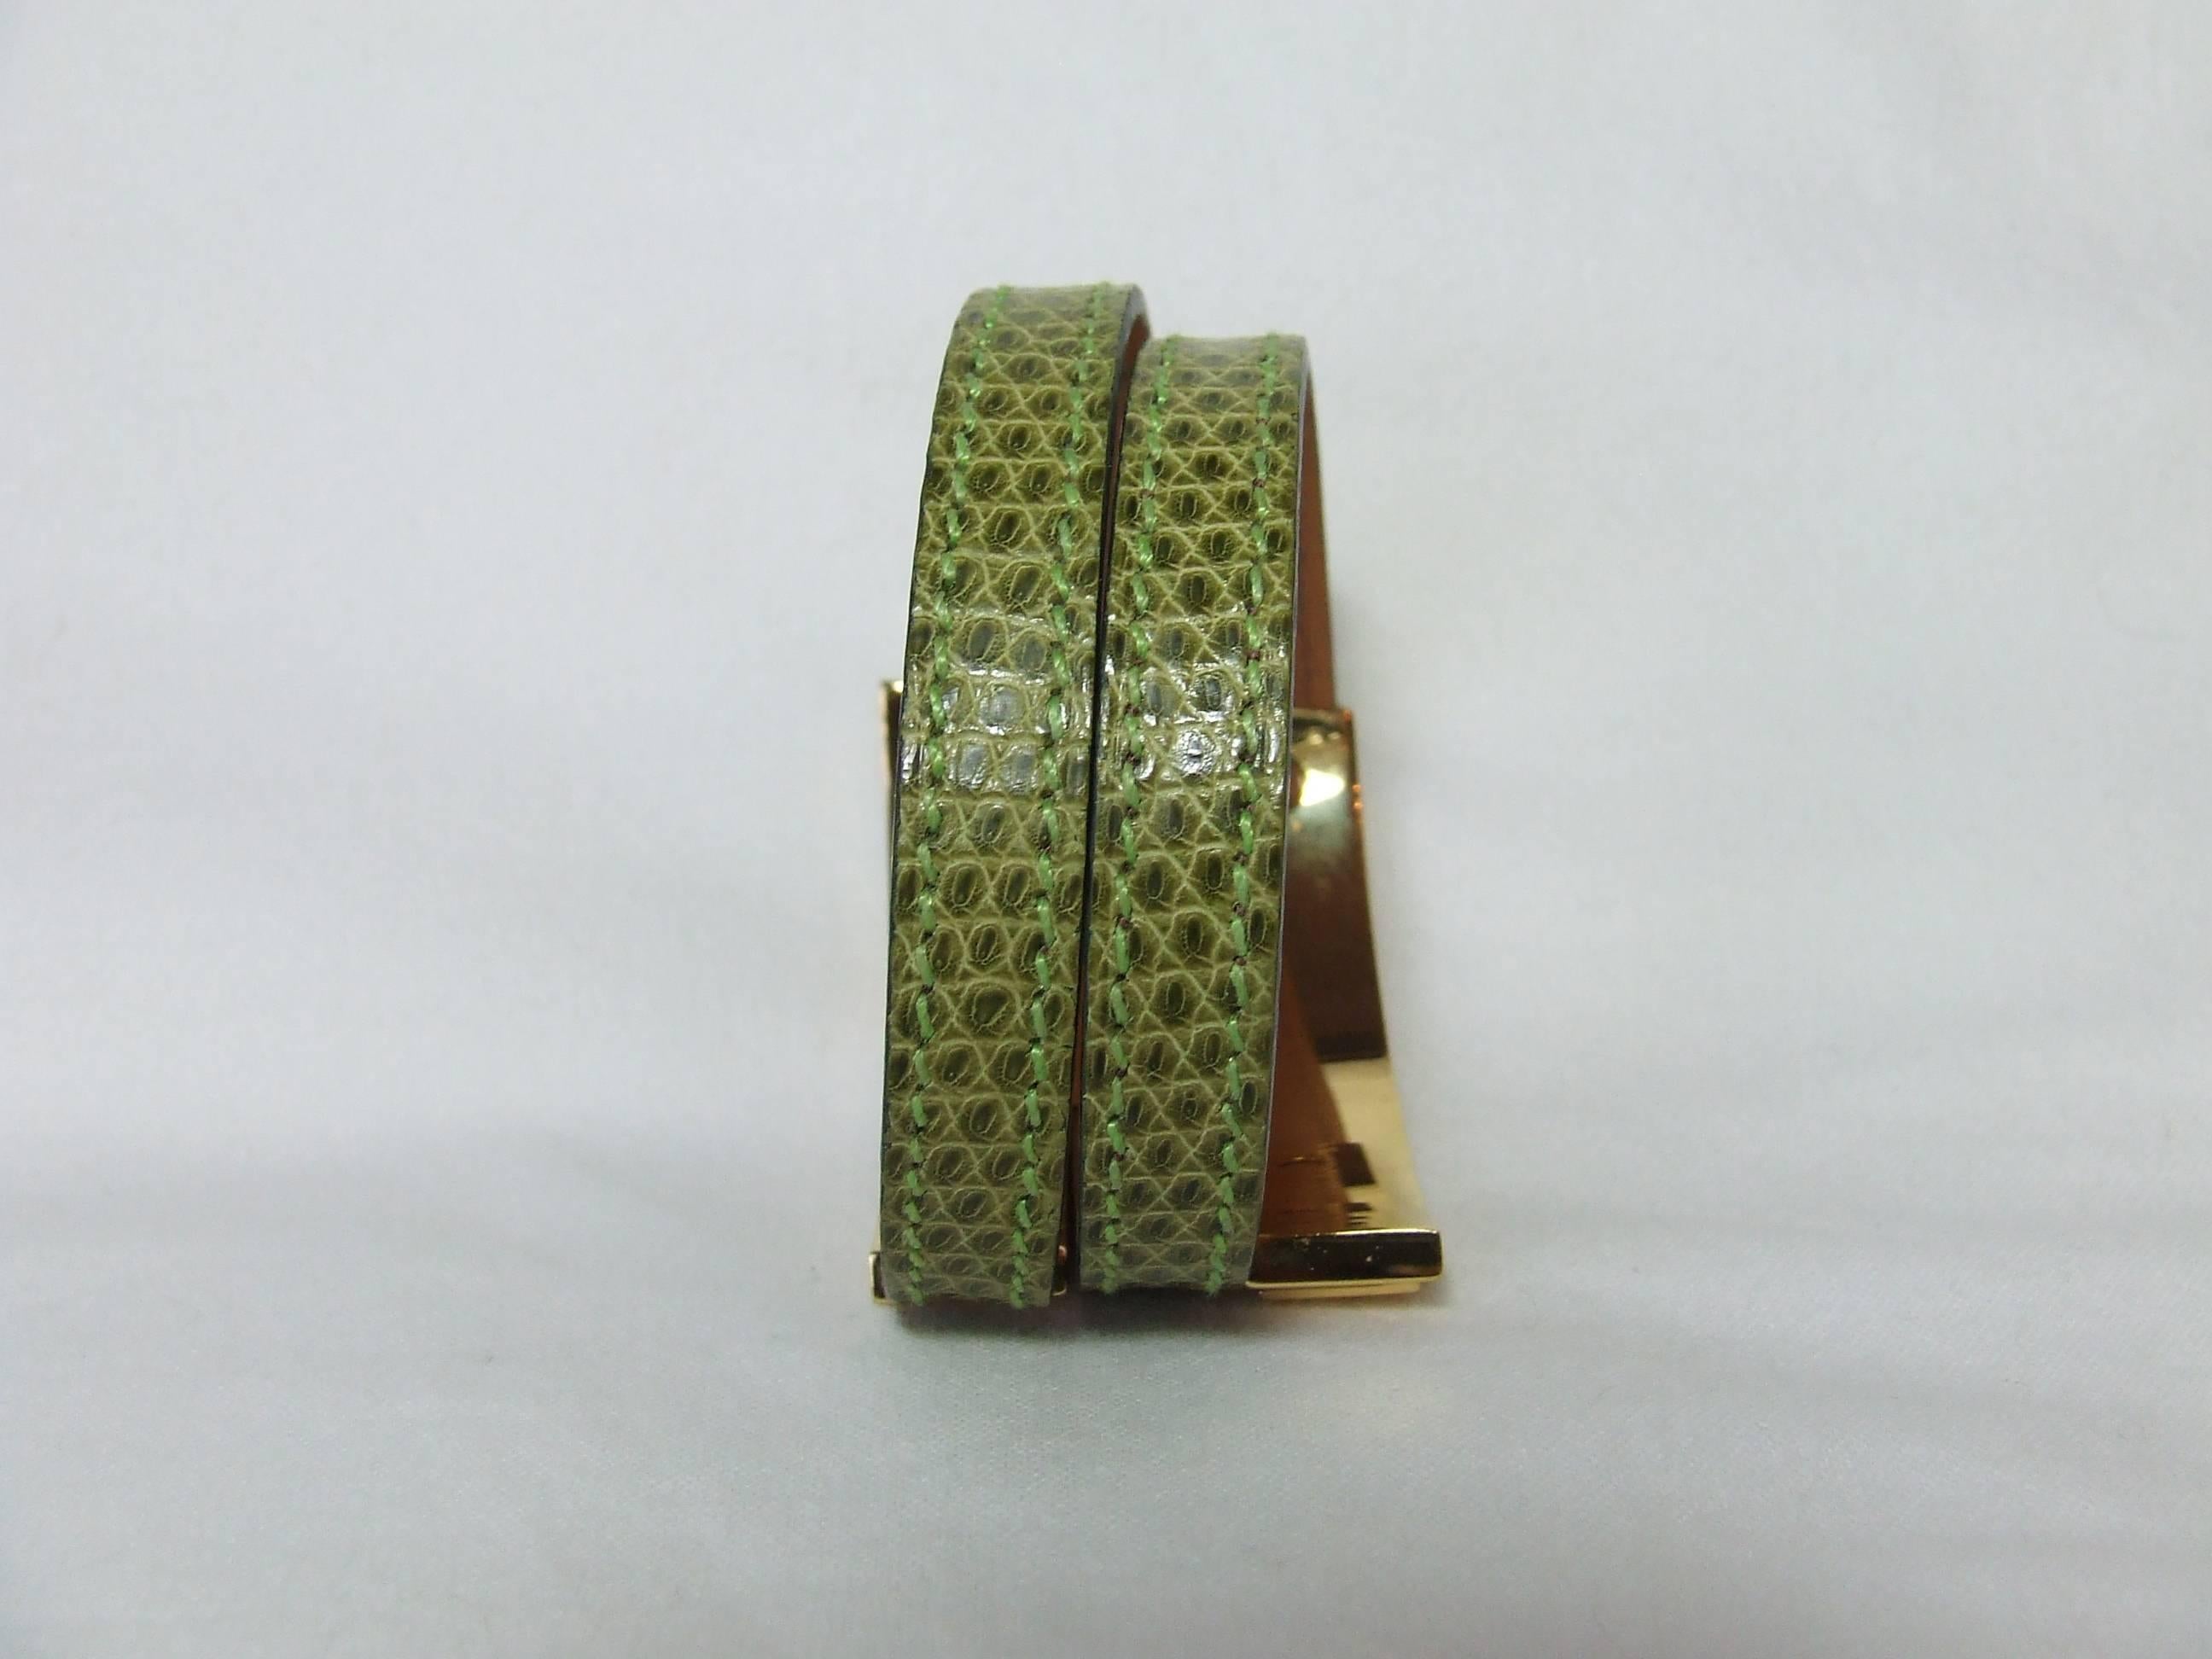 Beautiful Authentic Hermes Bracelet

"Pousse Pousse"

Stamp G in square

Made of Lizard Skin and Golden Plated Hardware

Colorway: ight Green

Size: Will fit any wrist as the bracelet adjusts by sliding the leather in the bars of the